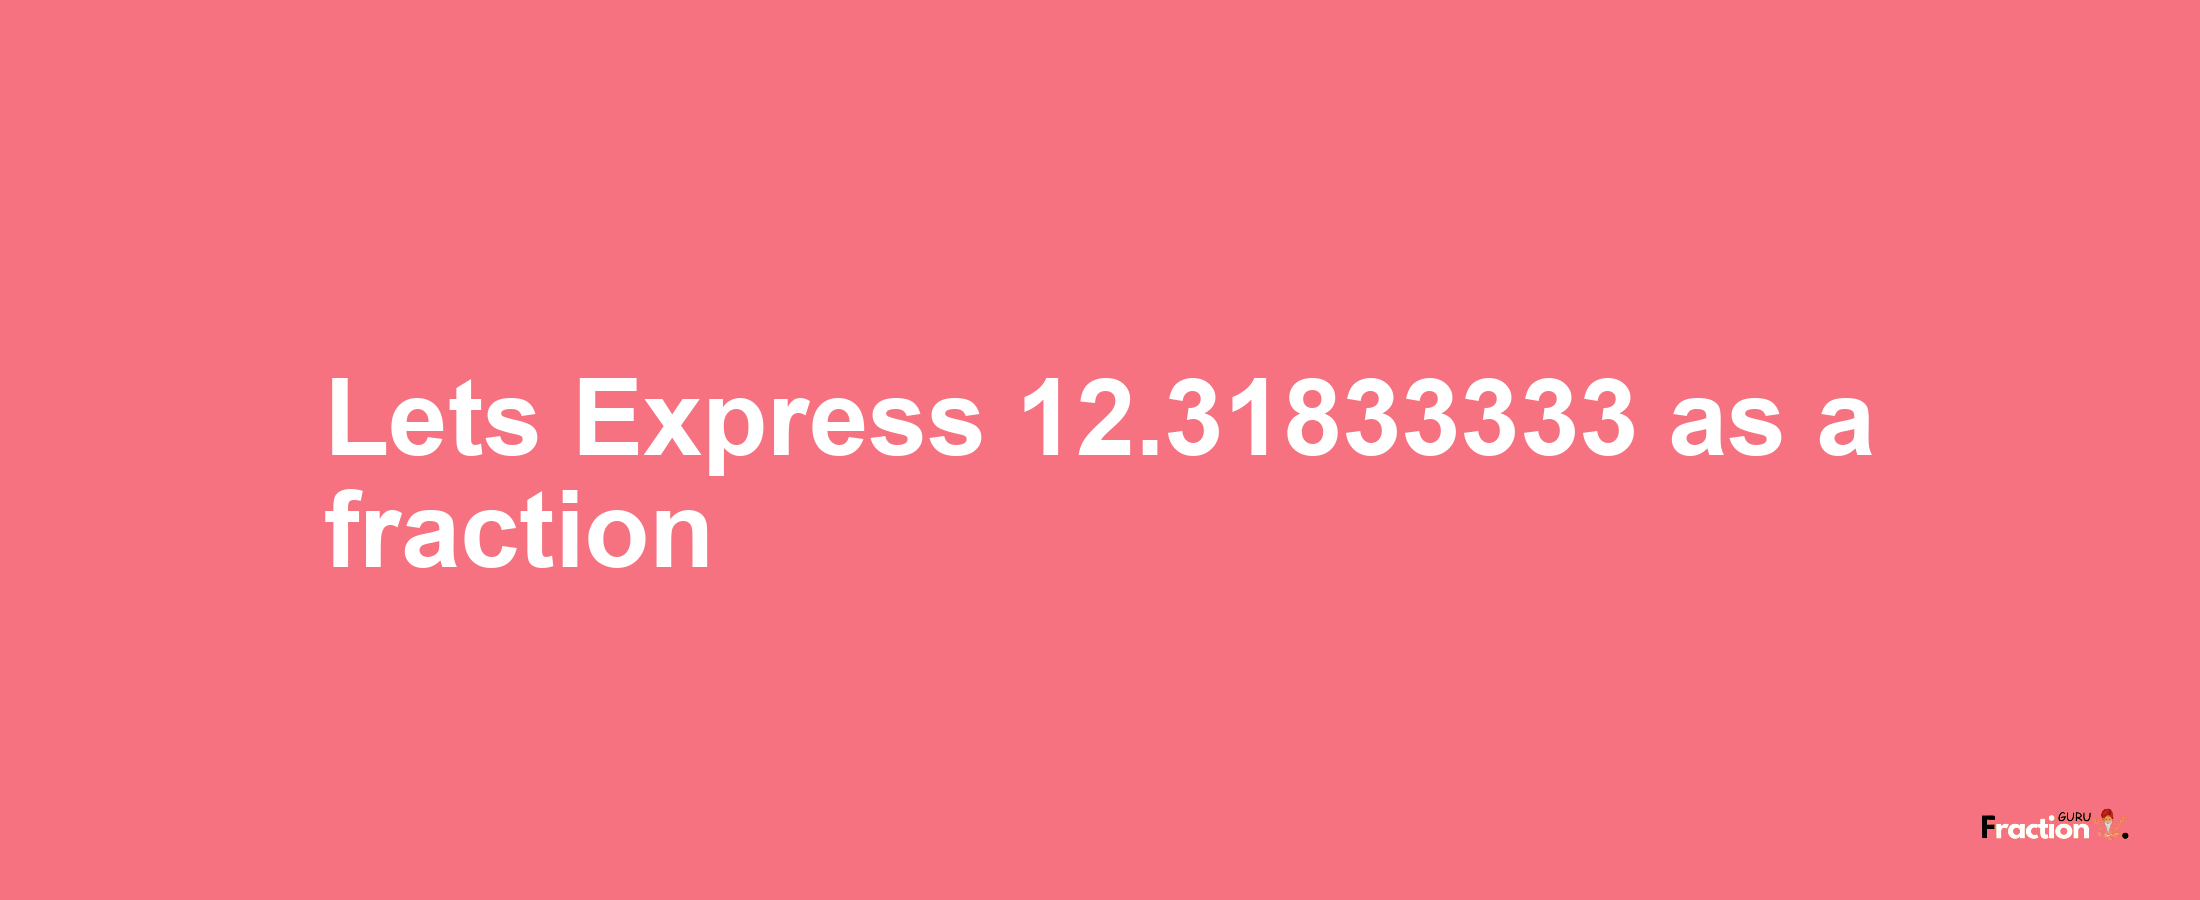 Lets Express 12.31833333 as afraction